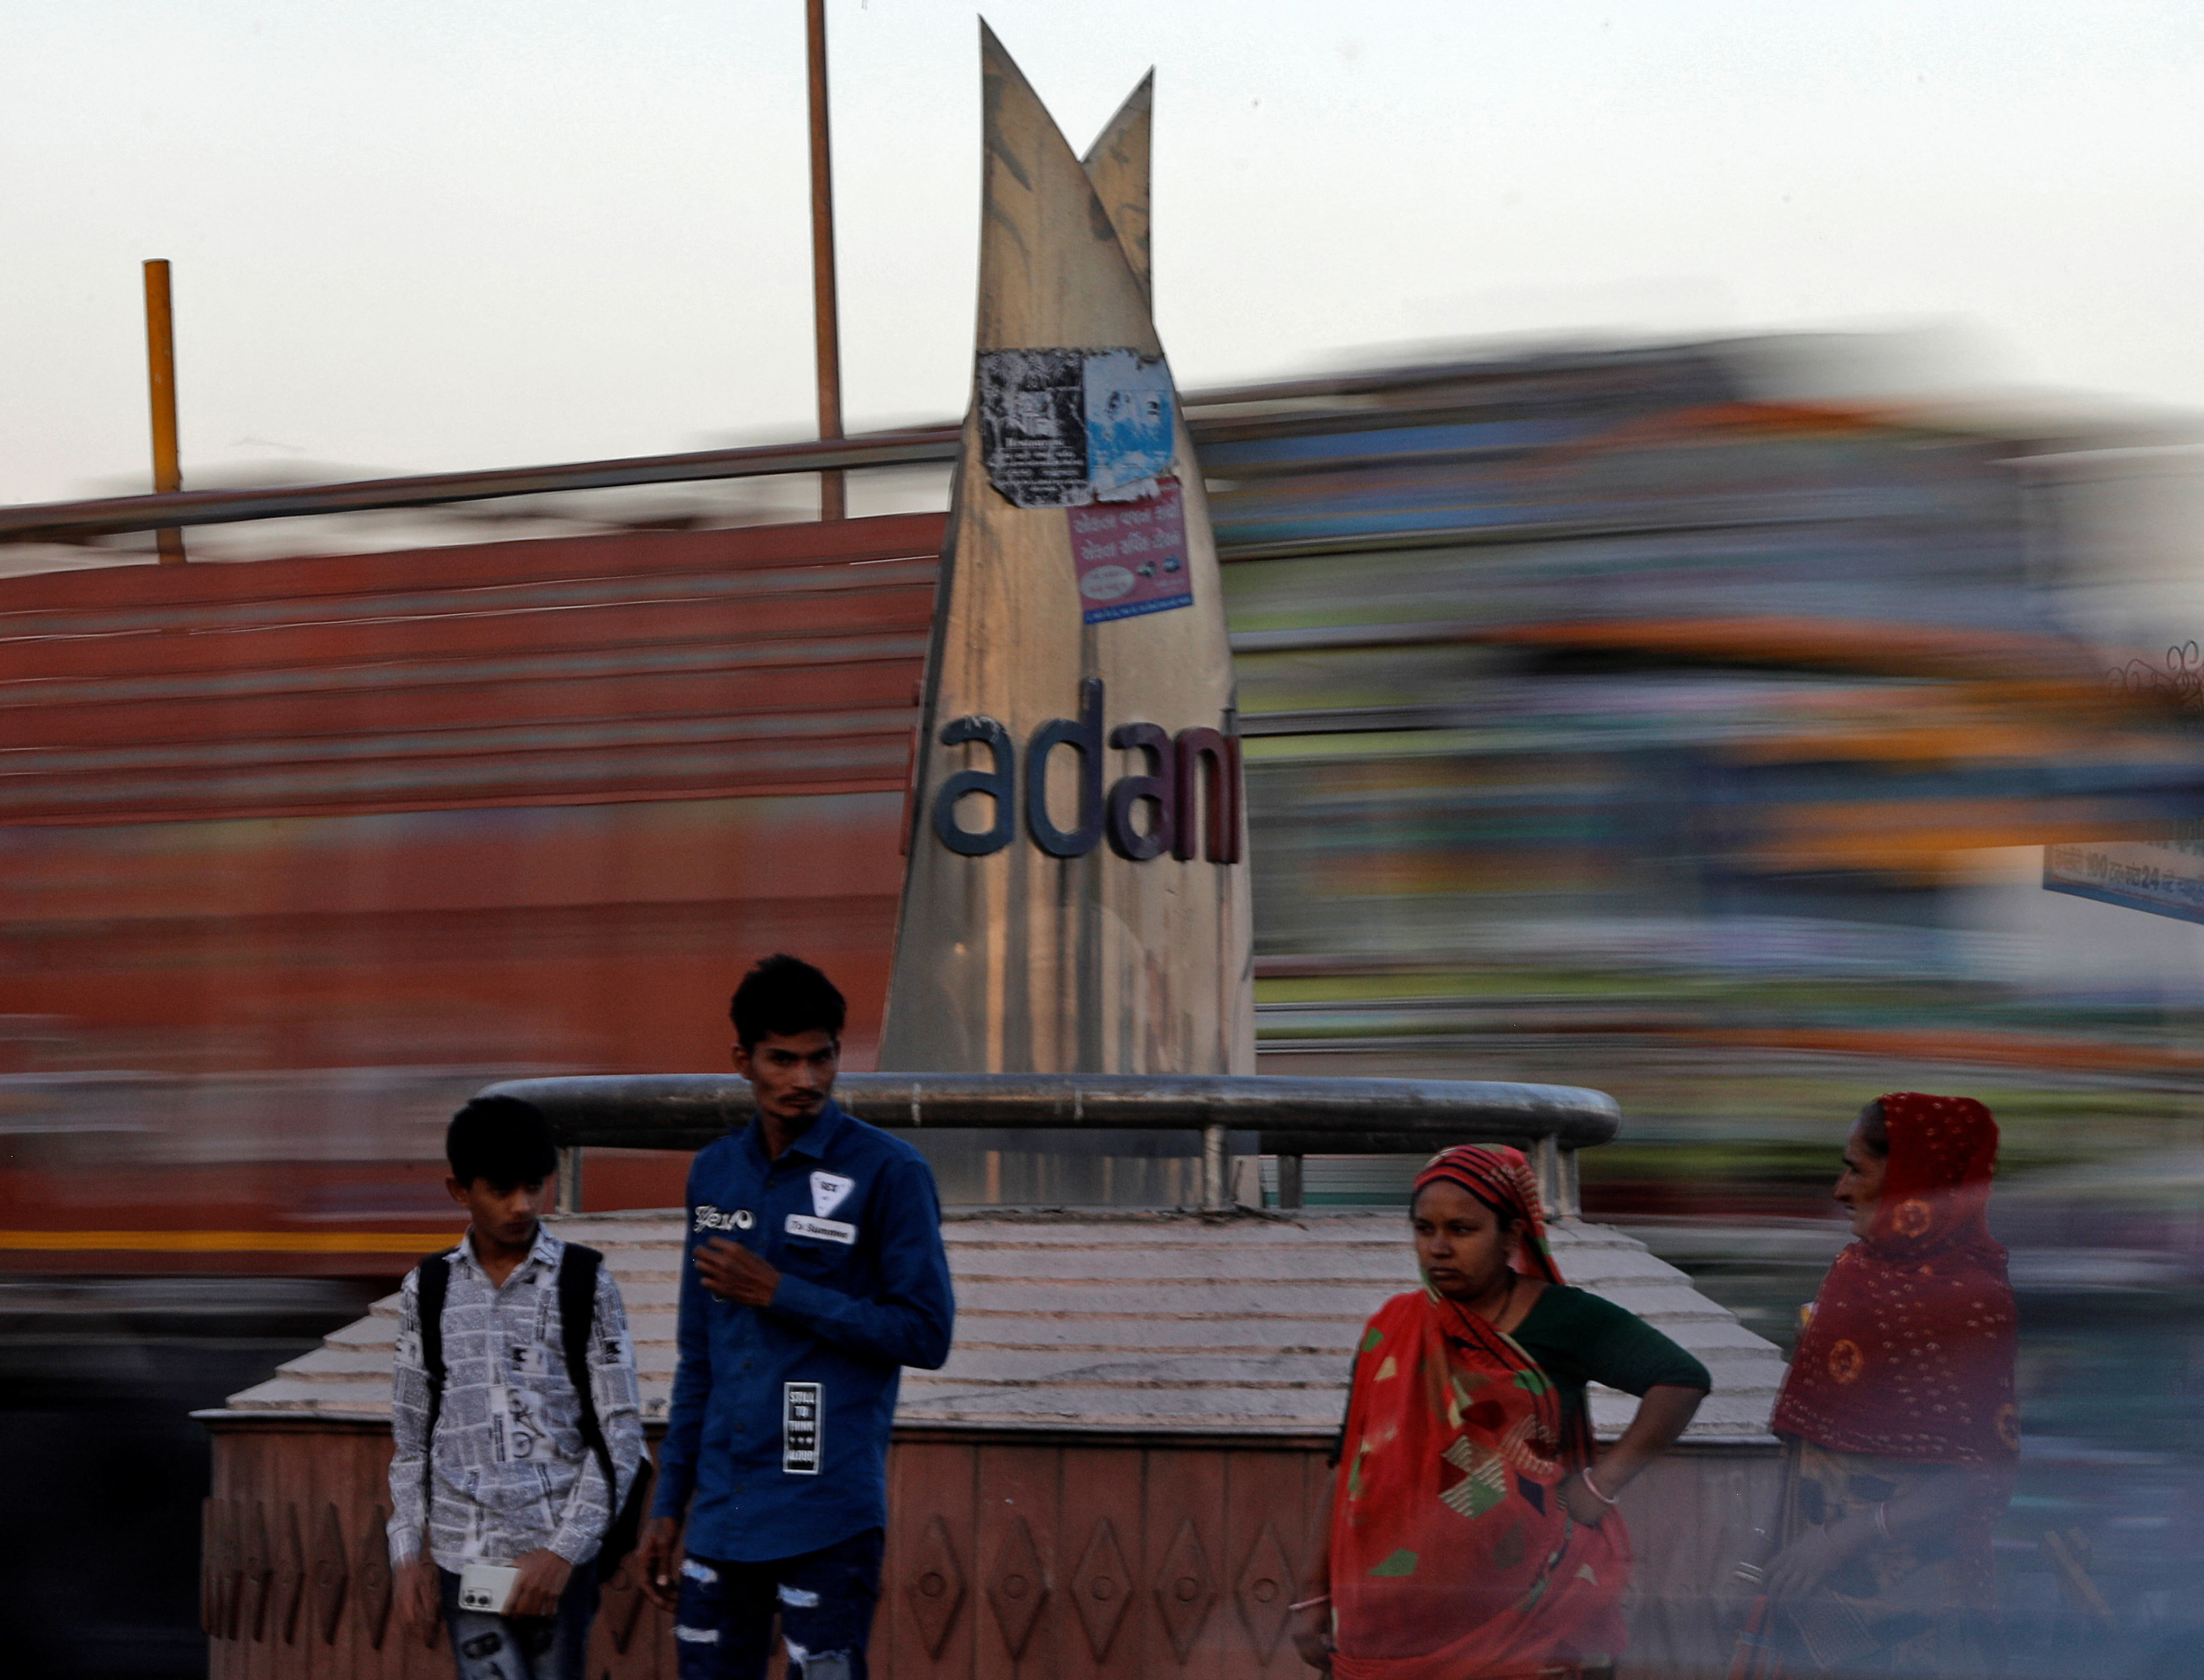 People wait to cross a road in front of the logo of the Adani Group installed at a roundabout on the ring road in Ahmedabad